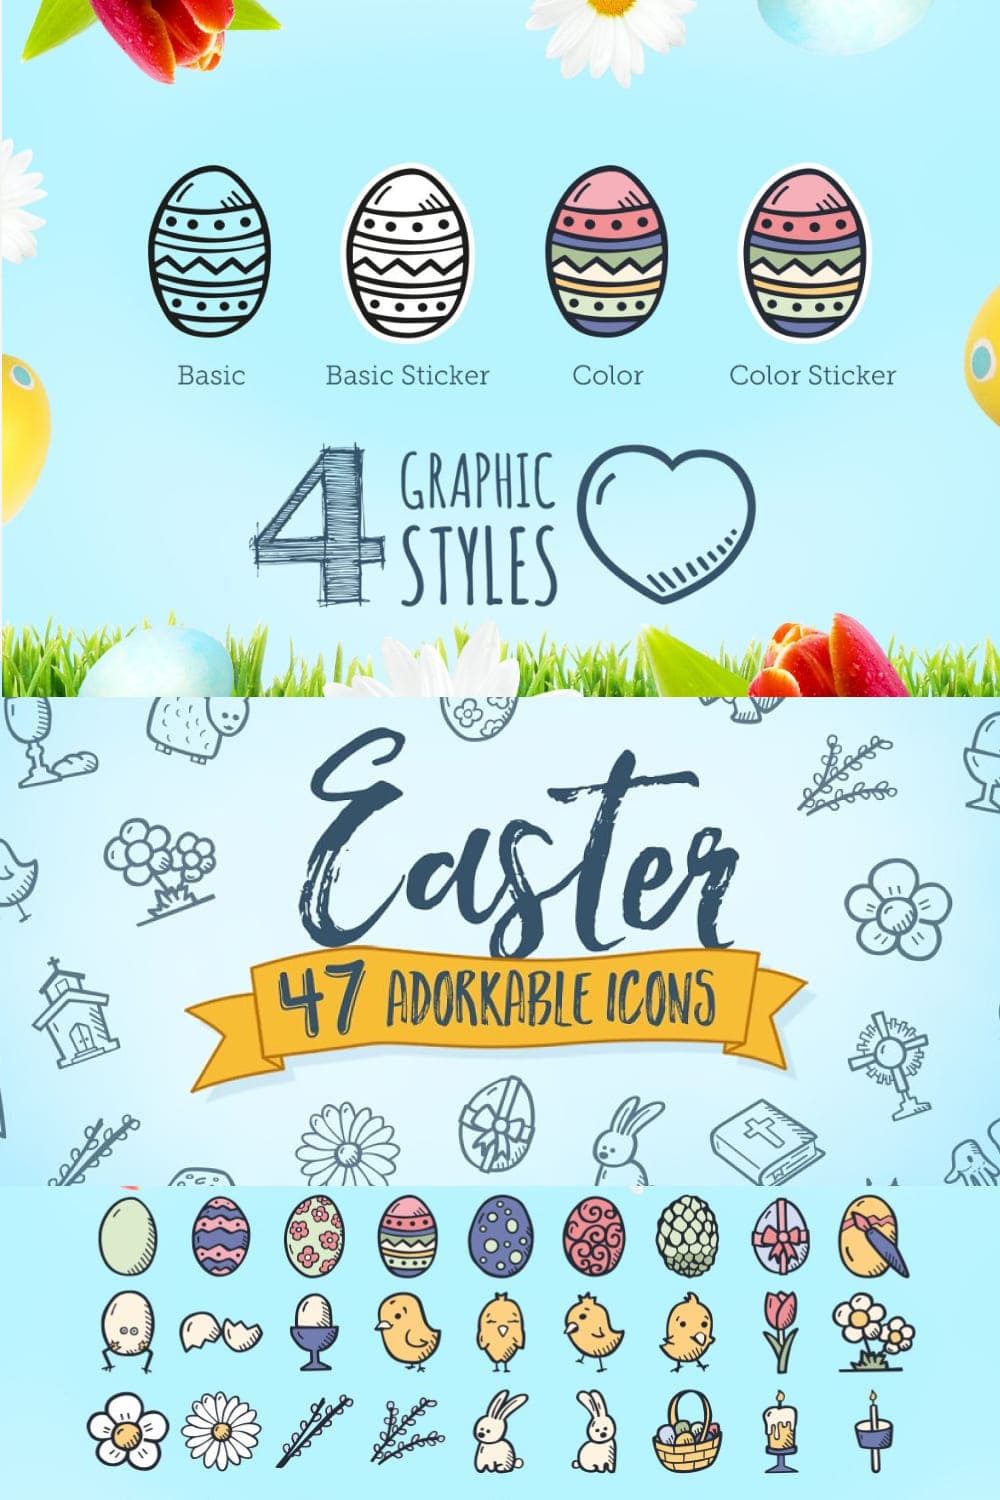 Easter hand drawn icons, picture for pinterest 1000x1500.